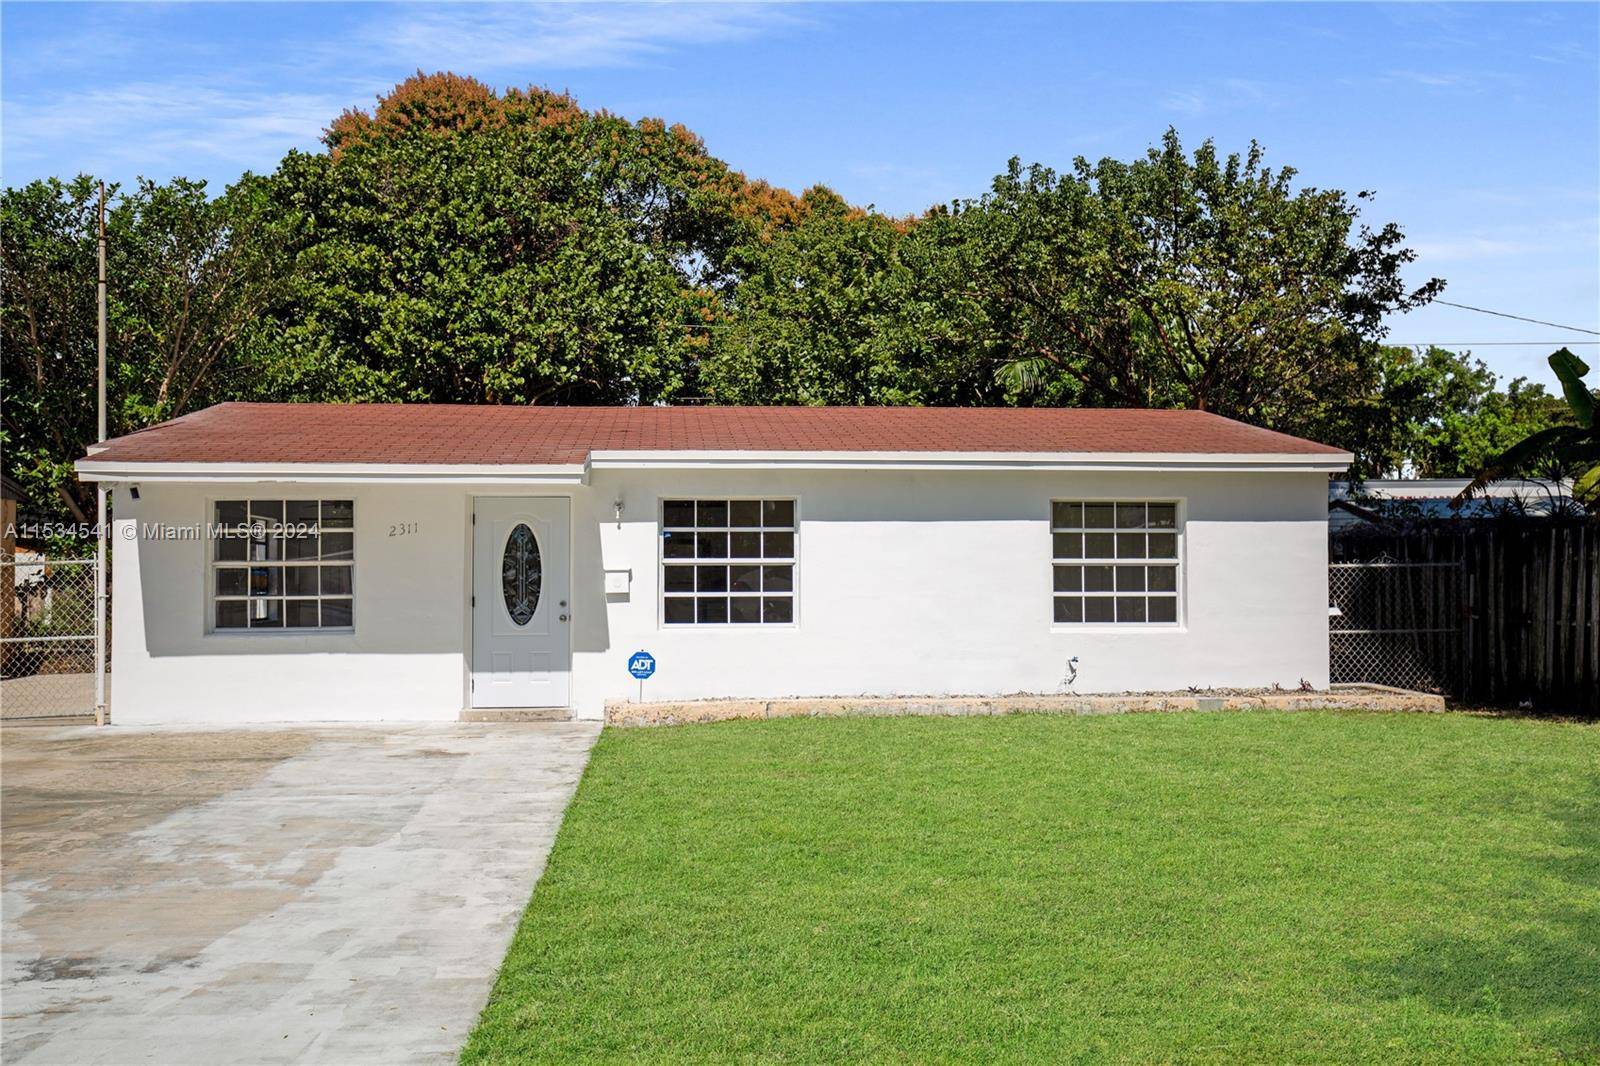 HUGE REDUCTION INVESTORS OR FIRST TIME HOME BUYERS In Hollywood, Florida, this charming single family home 3 1 with a 1 1 mother in law suite epitomizes modern living with ...